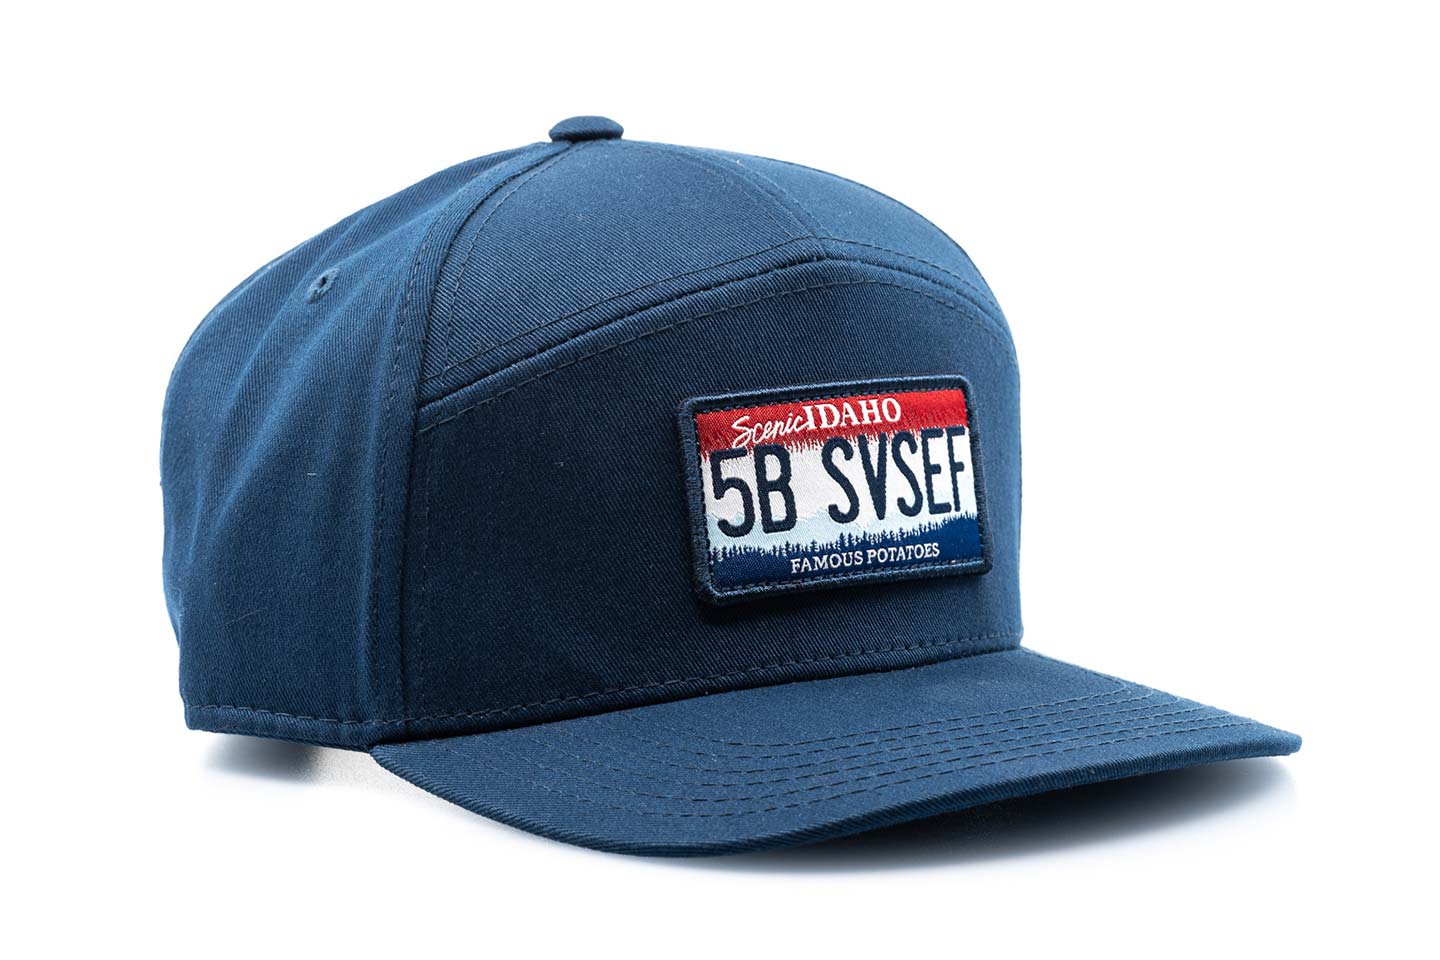 a blue baseball cap with an idaho license plate with "5B SVSEF" stitched on it